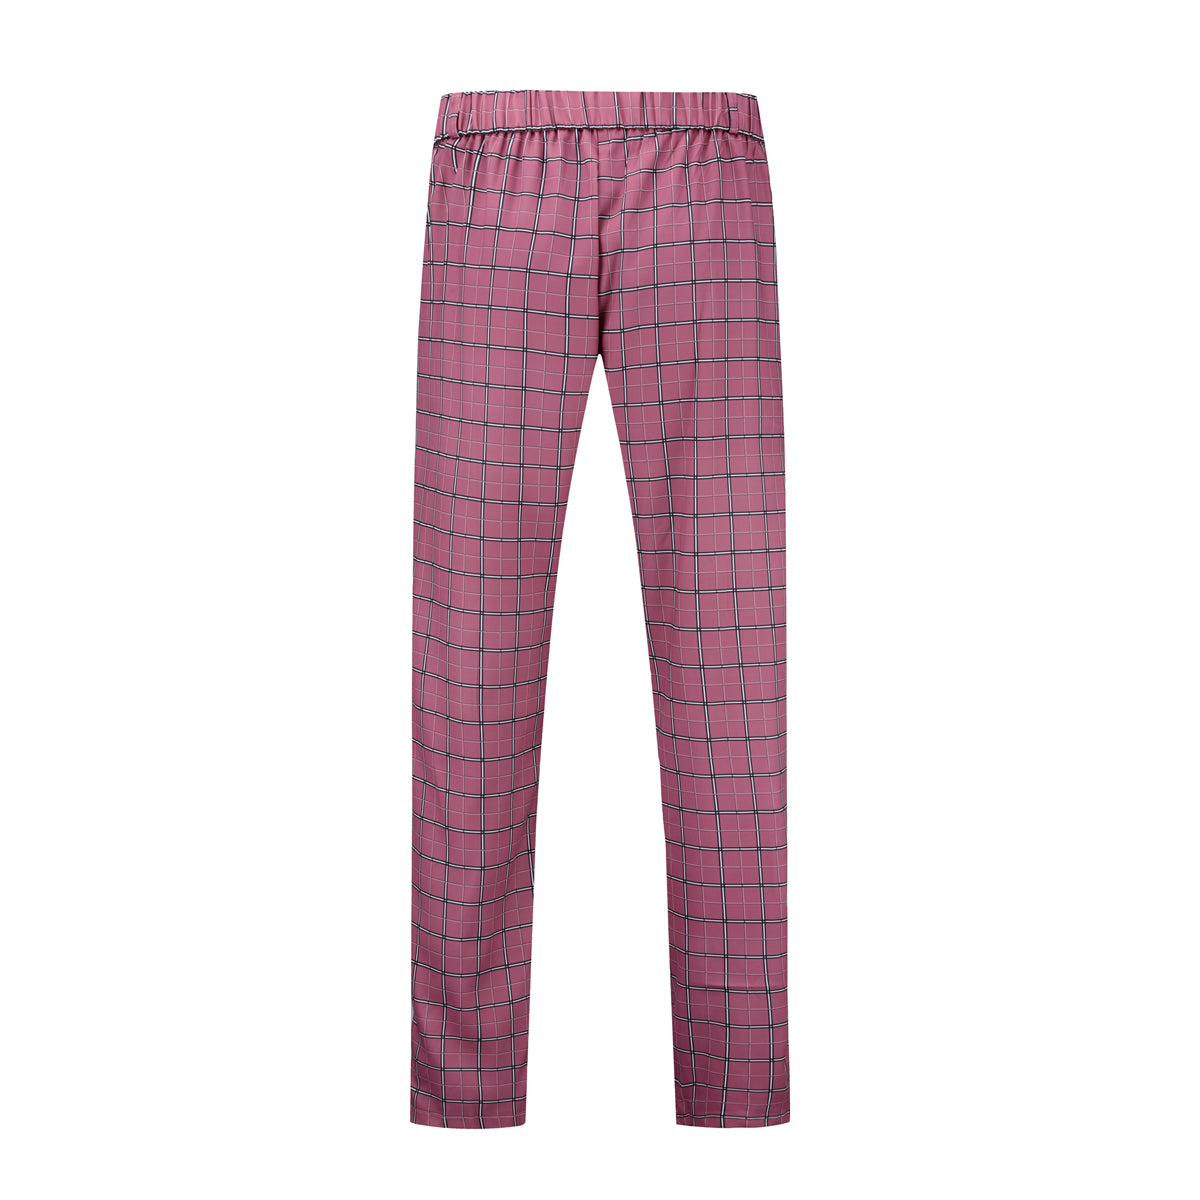 Men's Plaid Print Straight Casual Trousers Pink